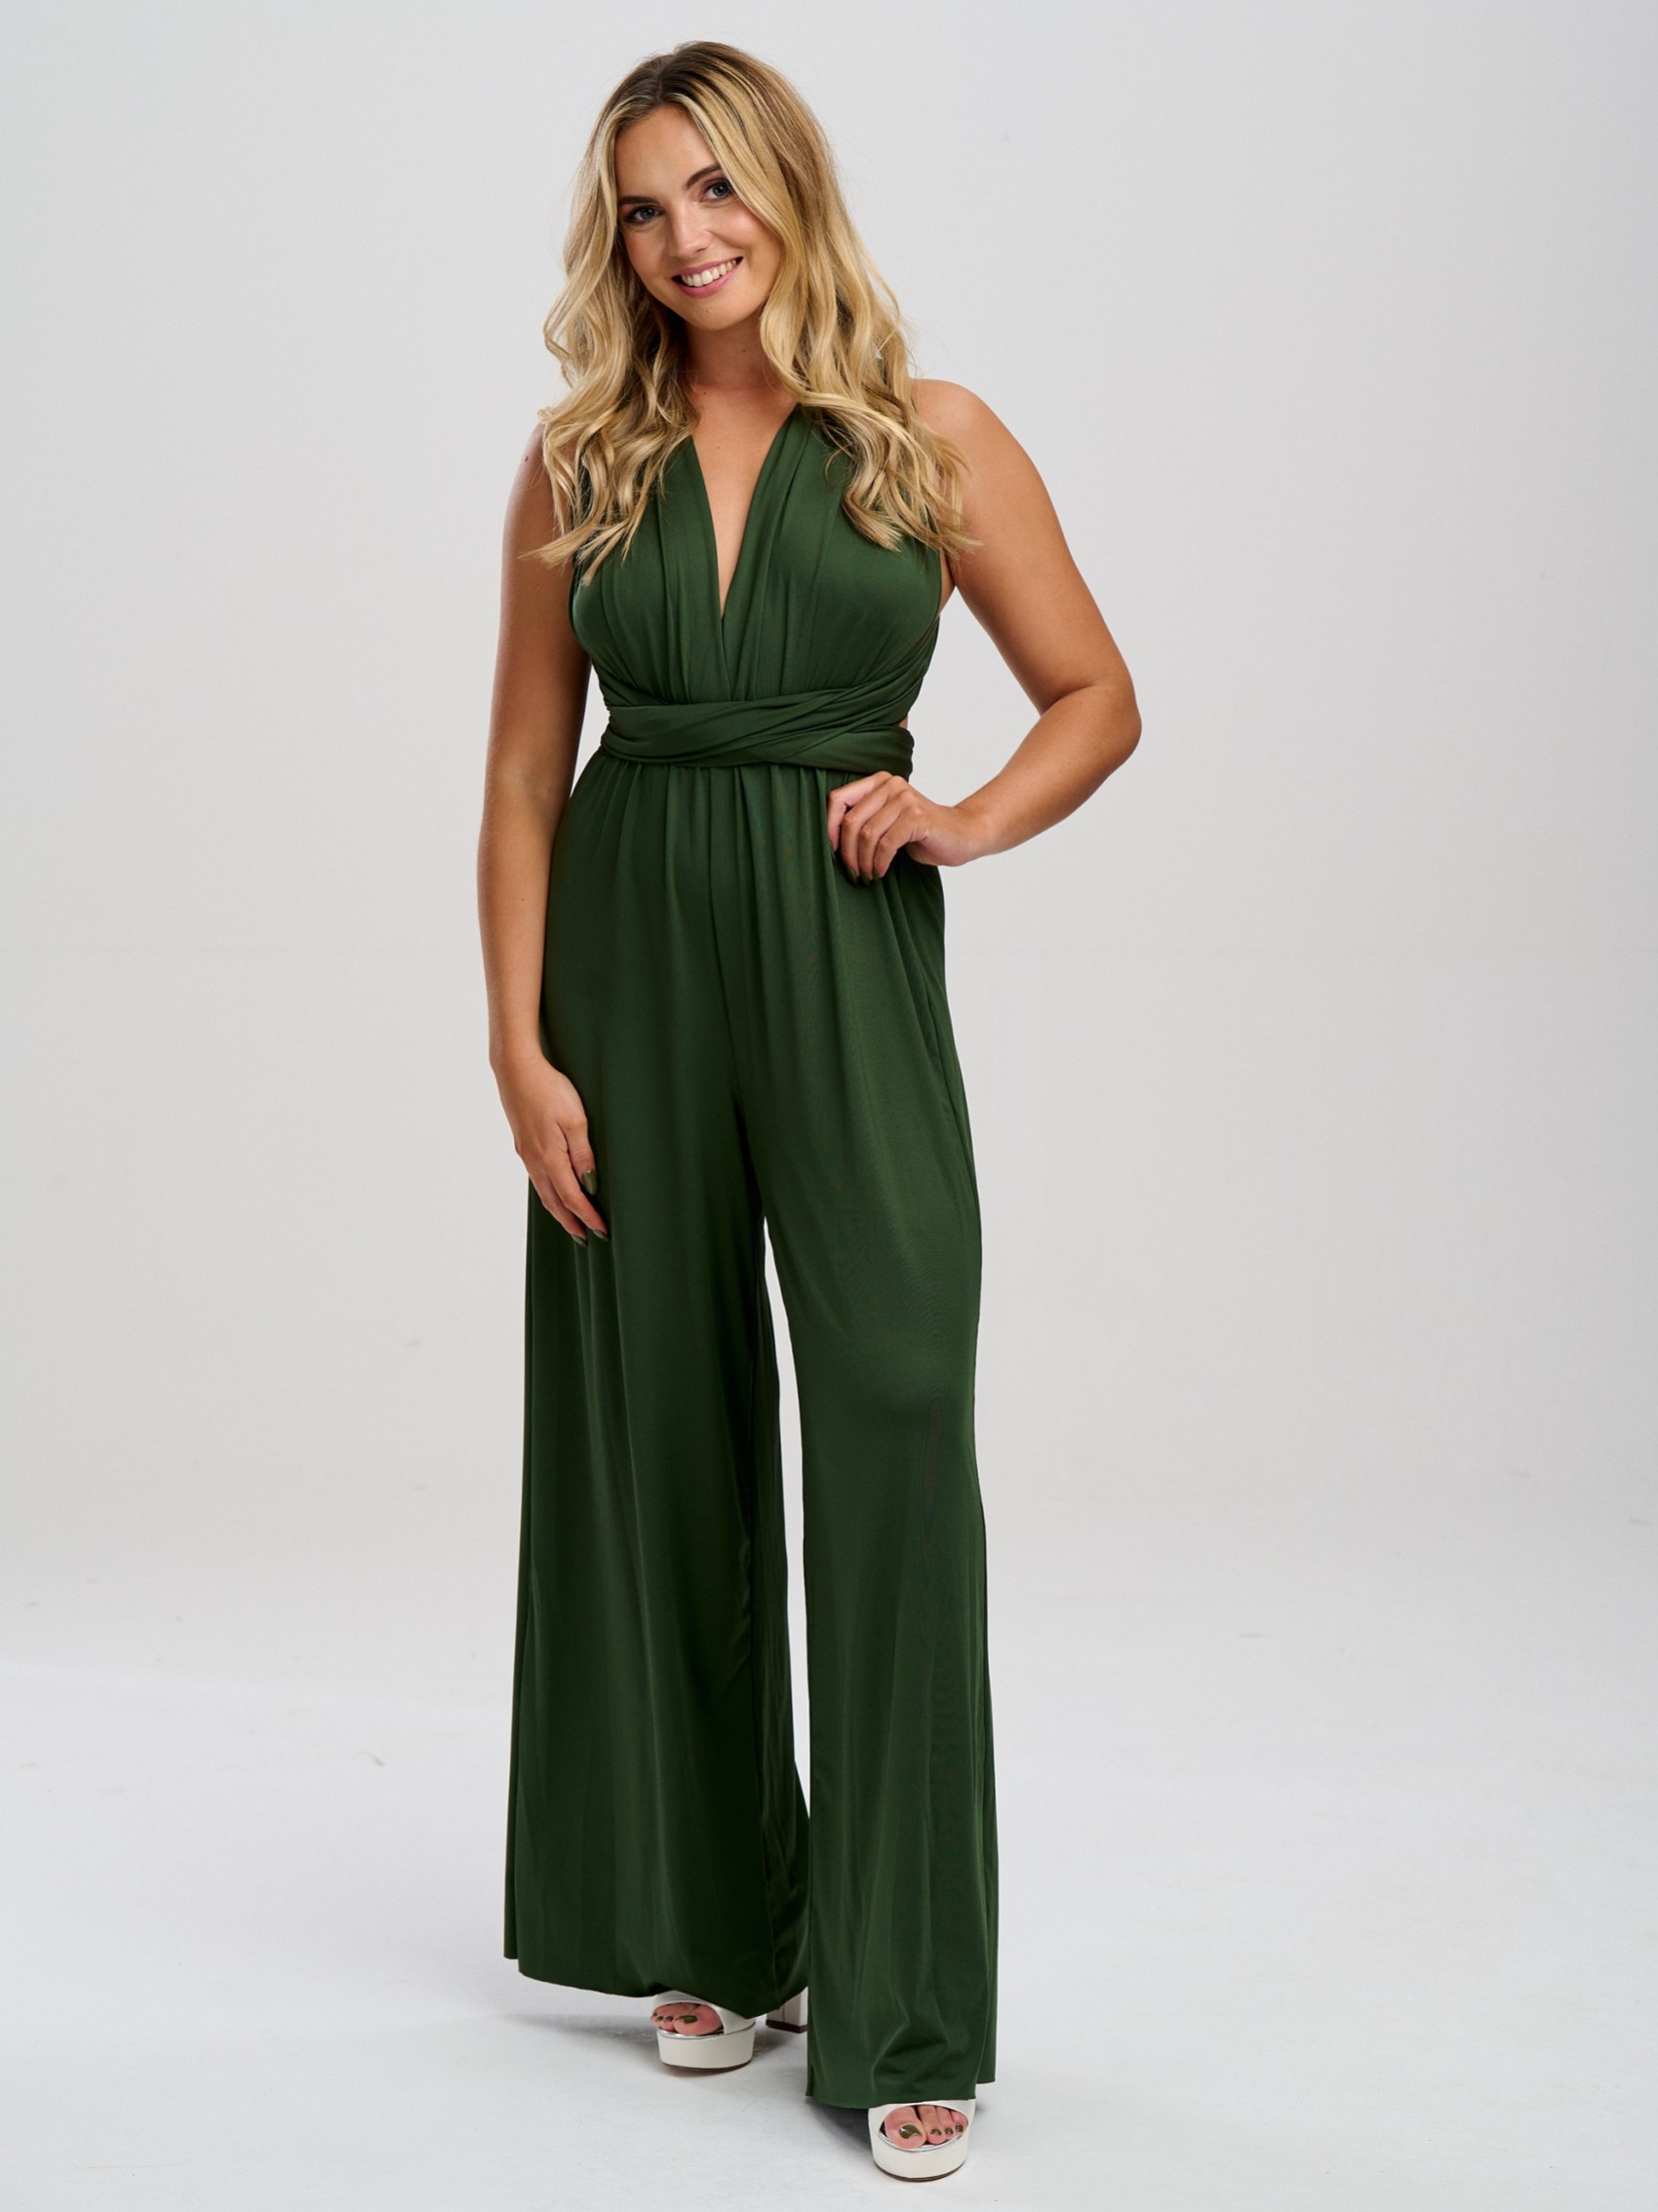 Emily Rose Olive Green Multiway Bridesmaid Jumpsuit